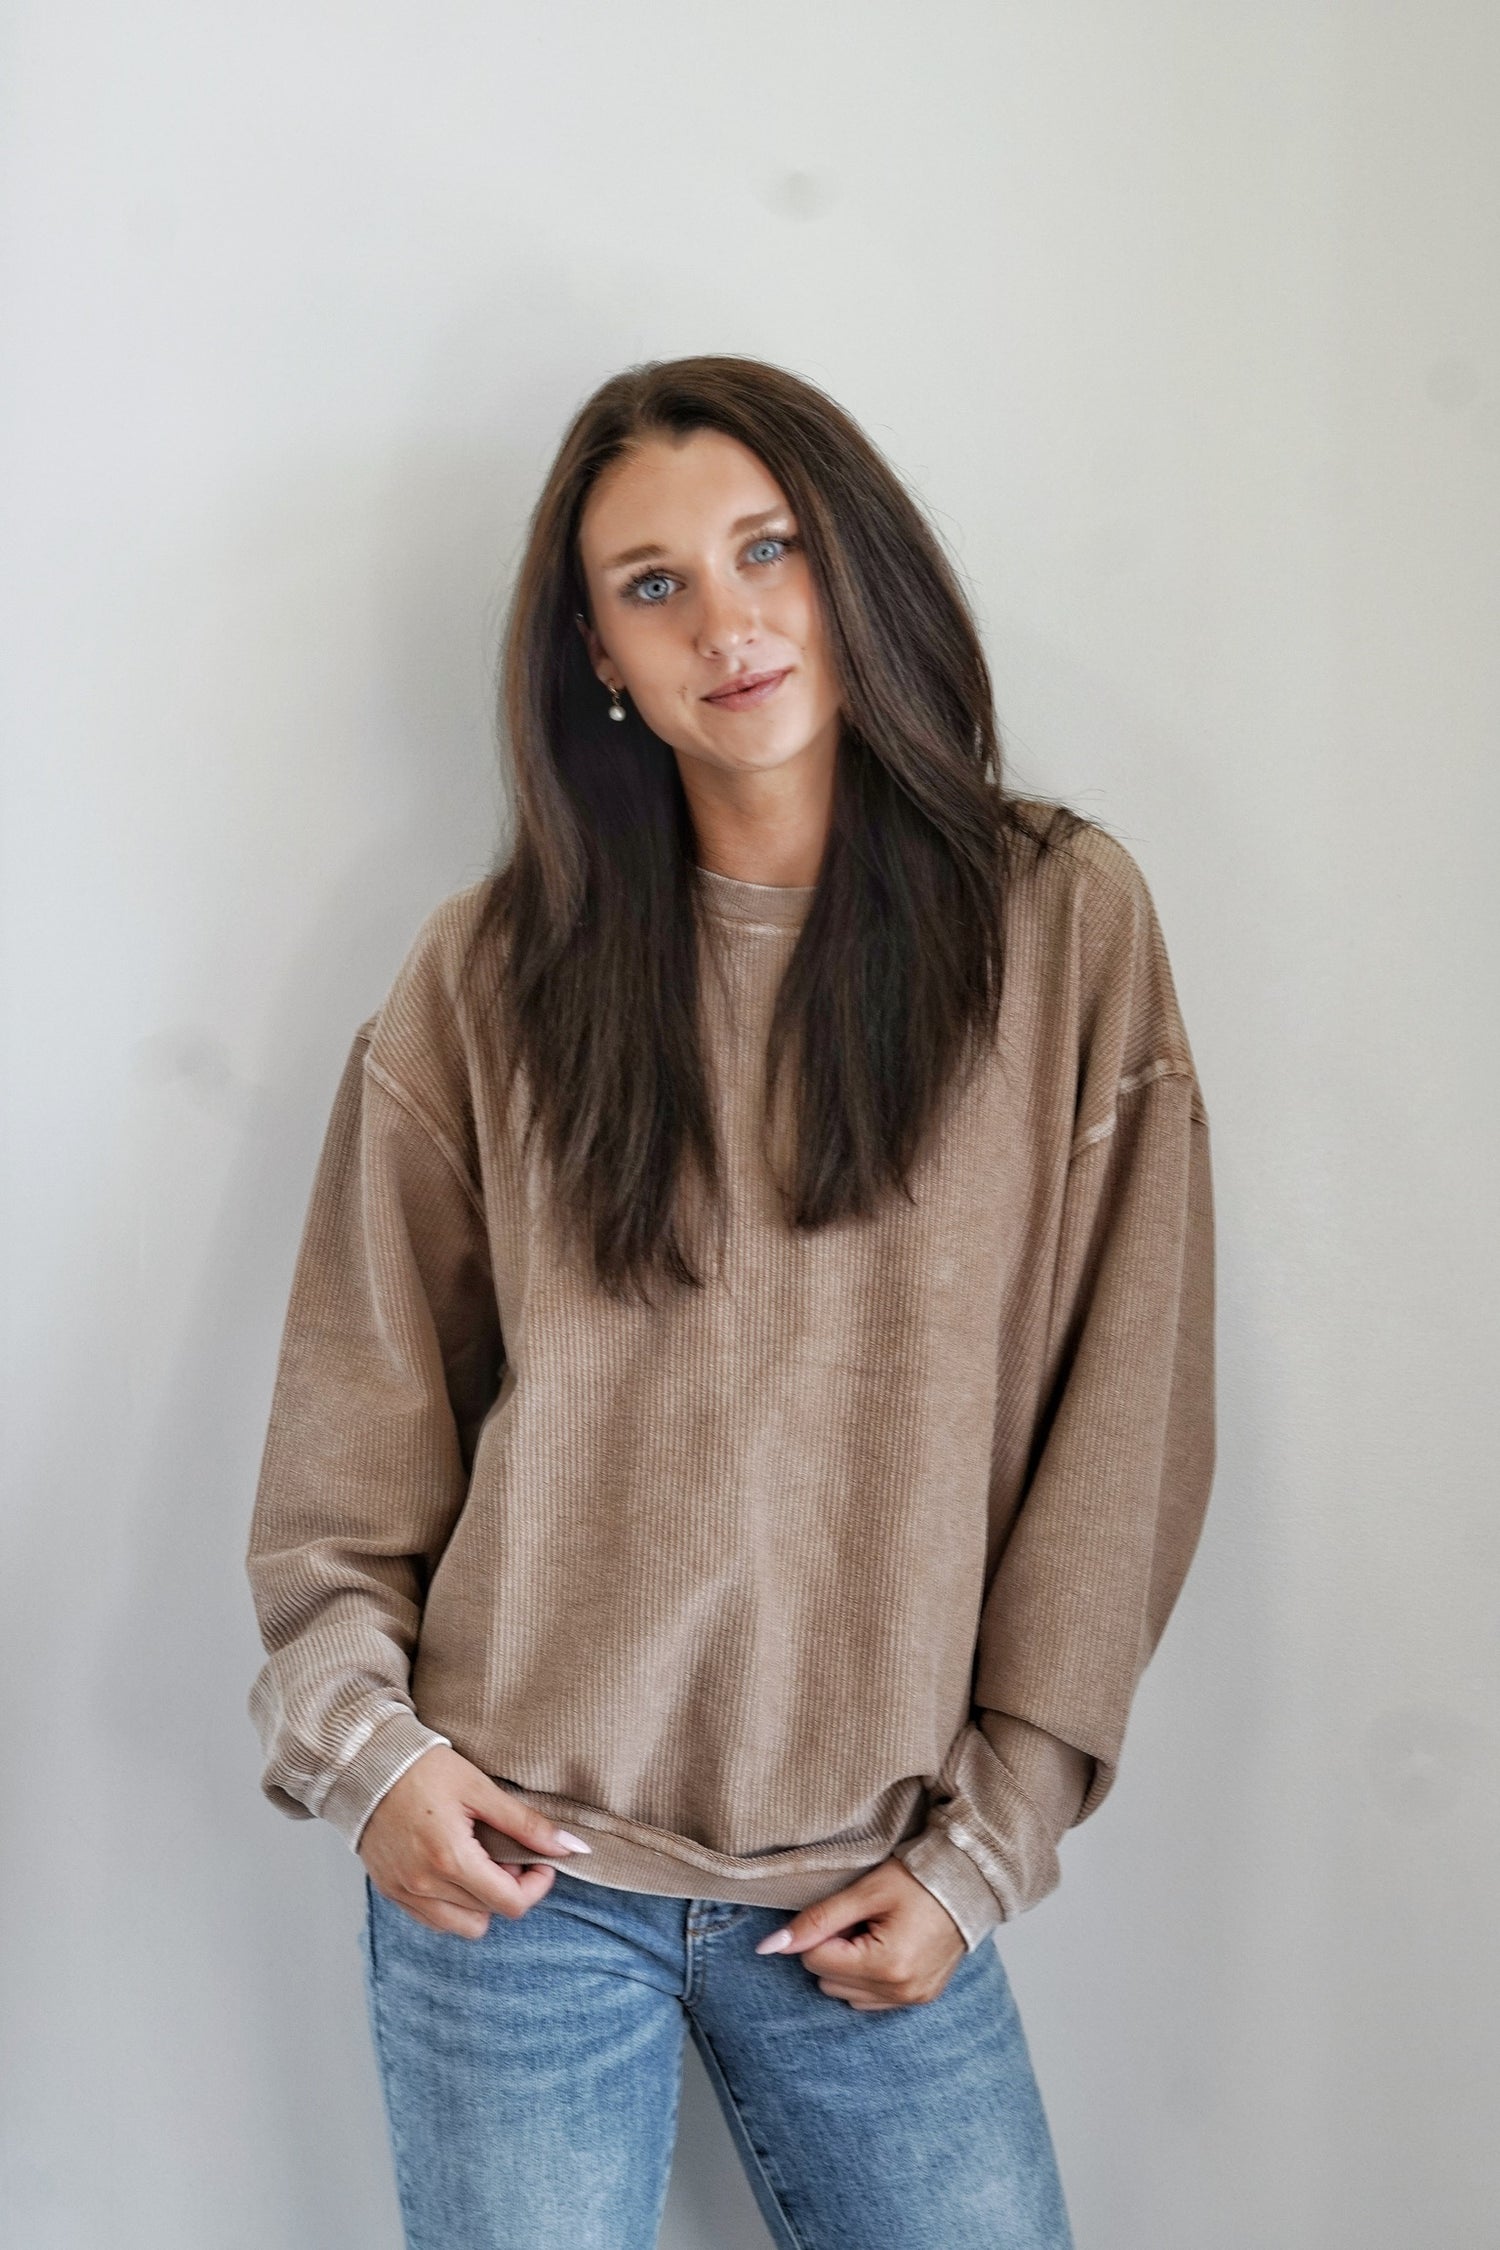 Calla Corded Crew Everyday Sweatshirt Crew Neckline Long Sleeve Corded Material Colors:  Mocha Full Length Relaxed Fit 100% Cotton